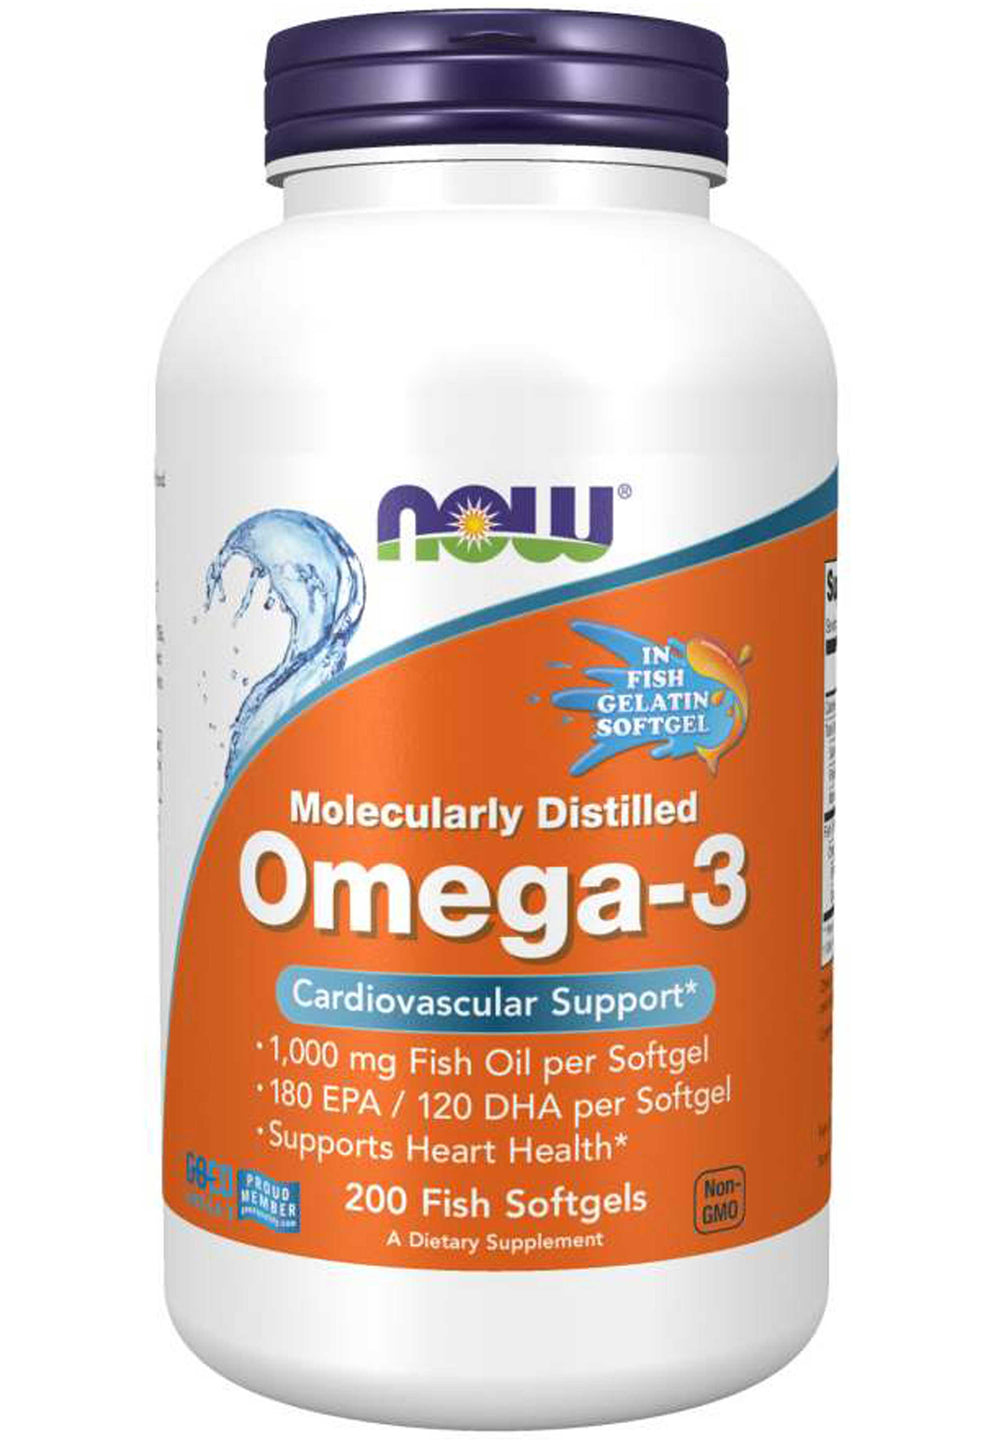 NOW Omega3 Molecularly Distilled FISH Softgels Supplement First